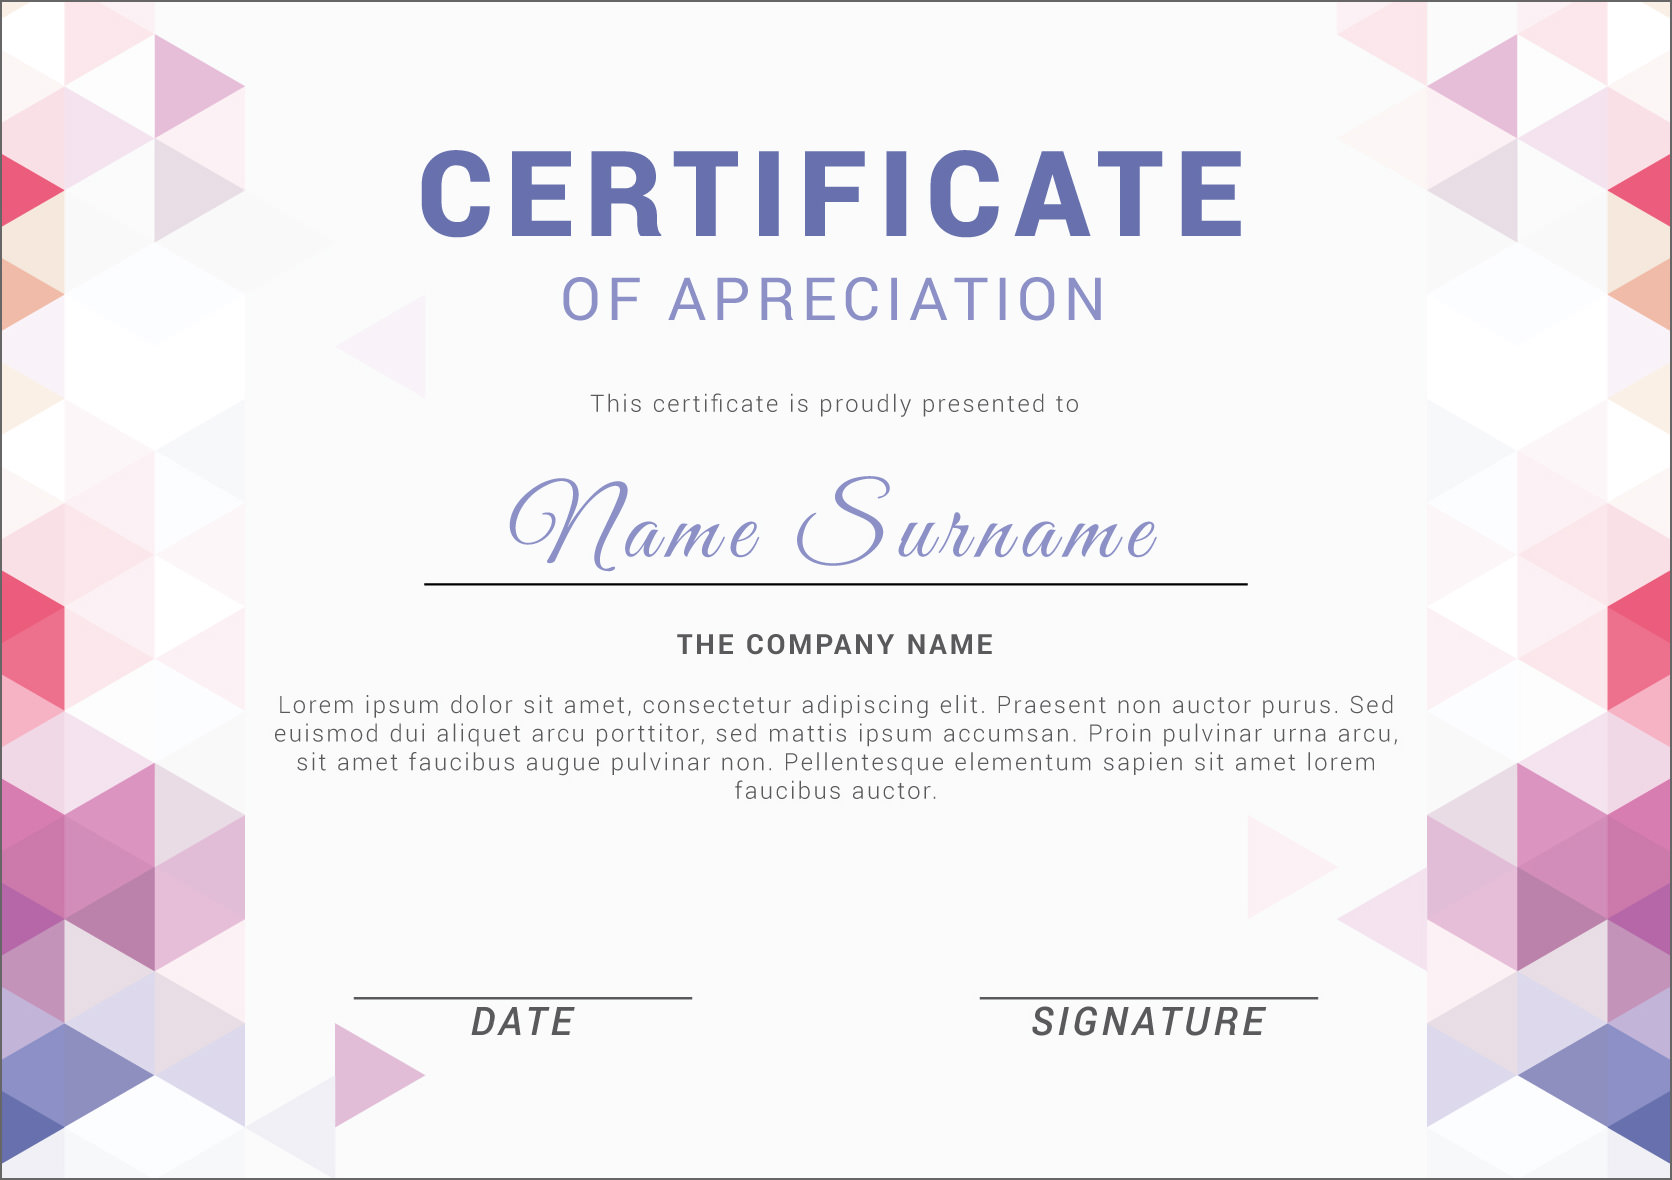 50-free-creative-blank-certificate-templates-in-psd-photoshop-vector-illustrator